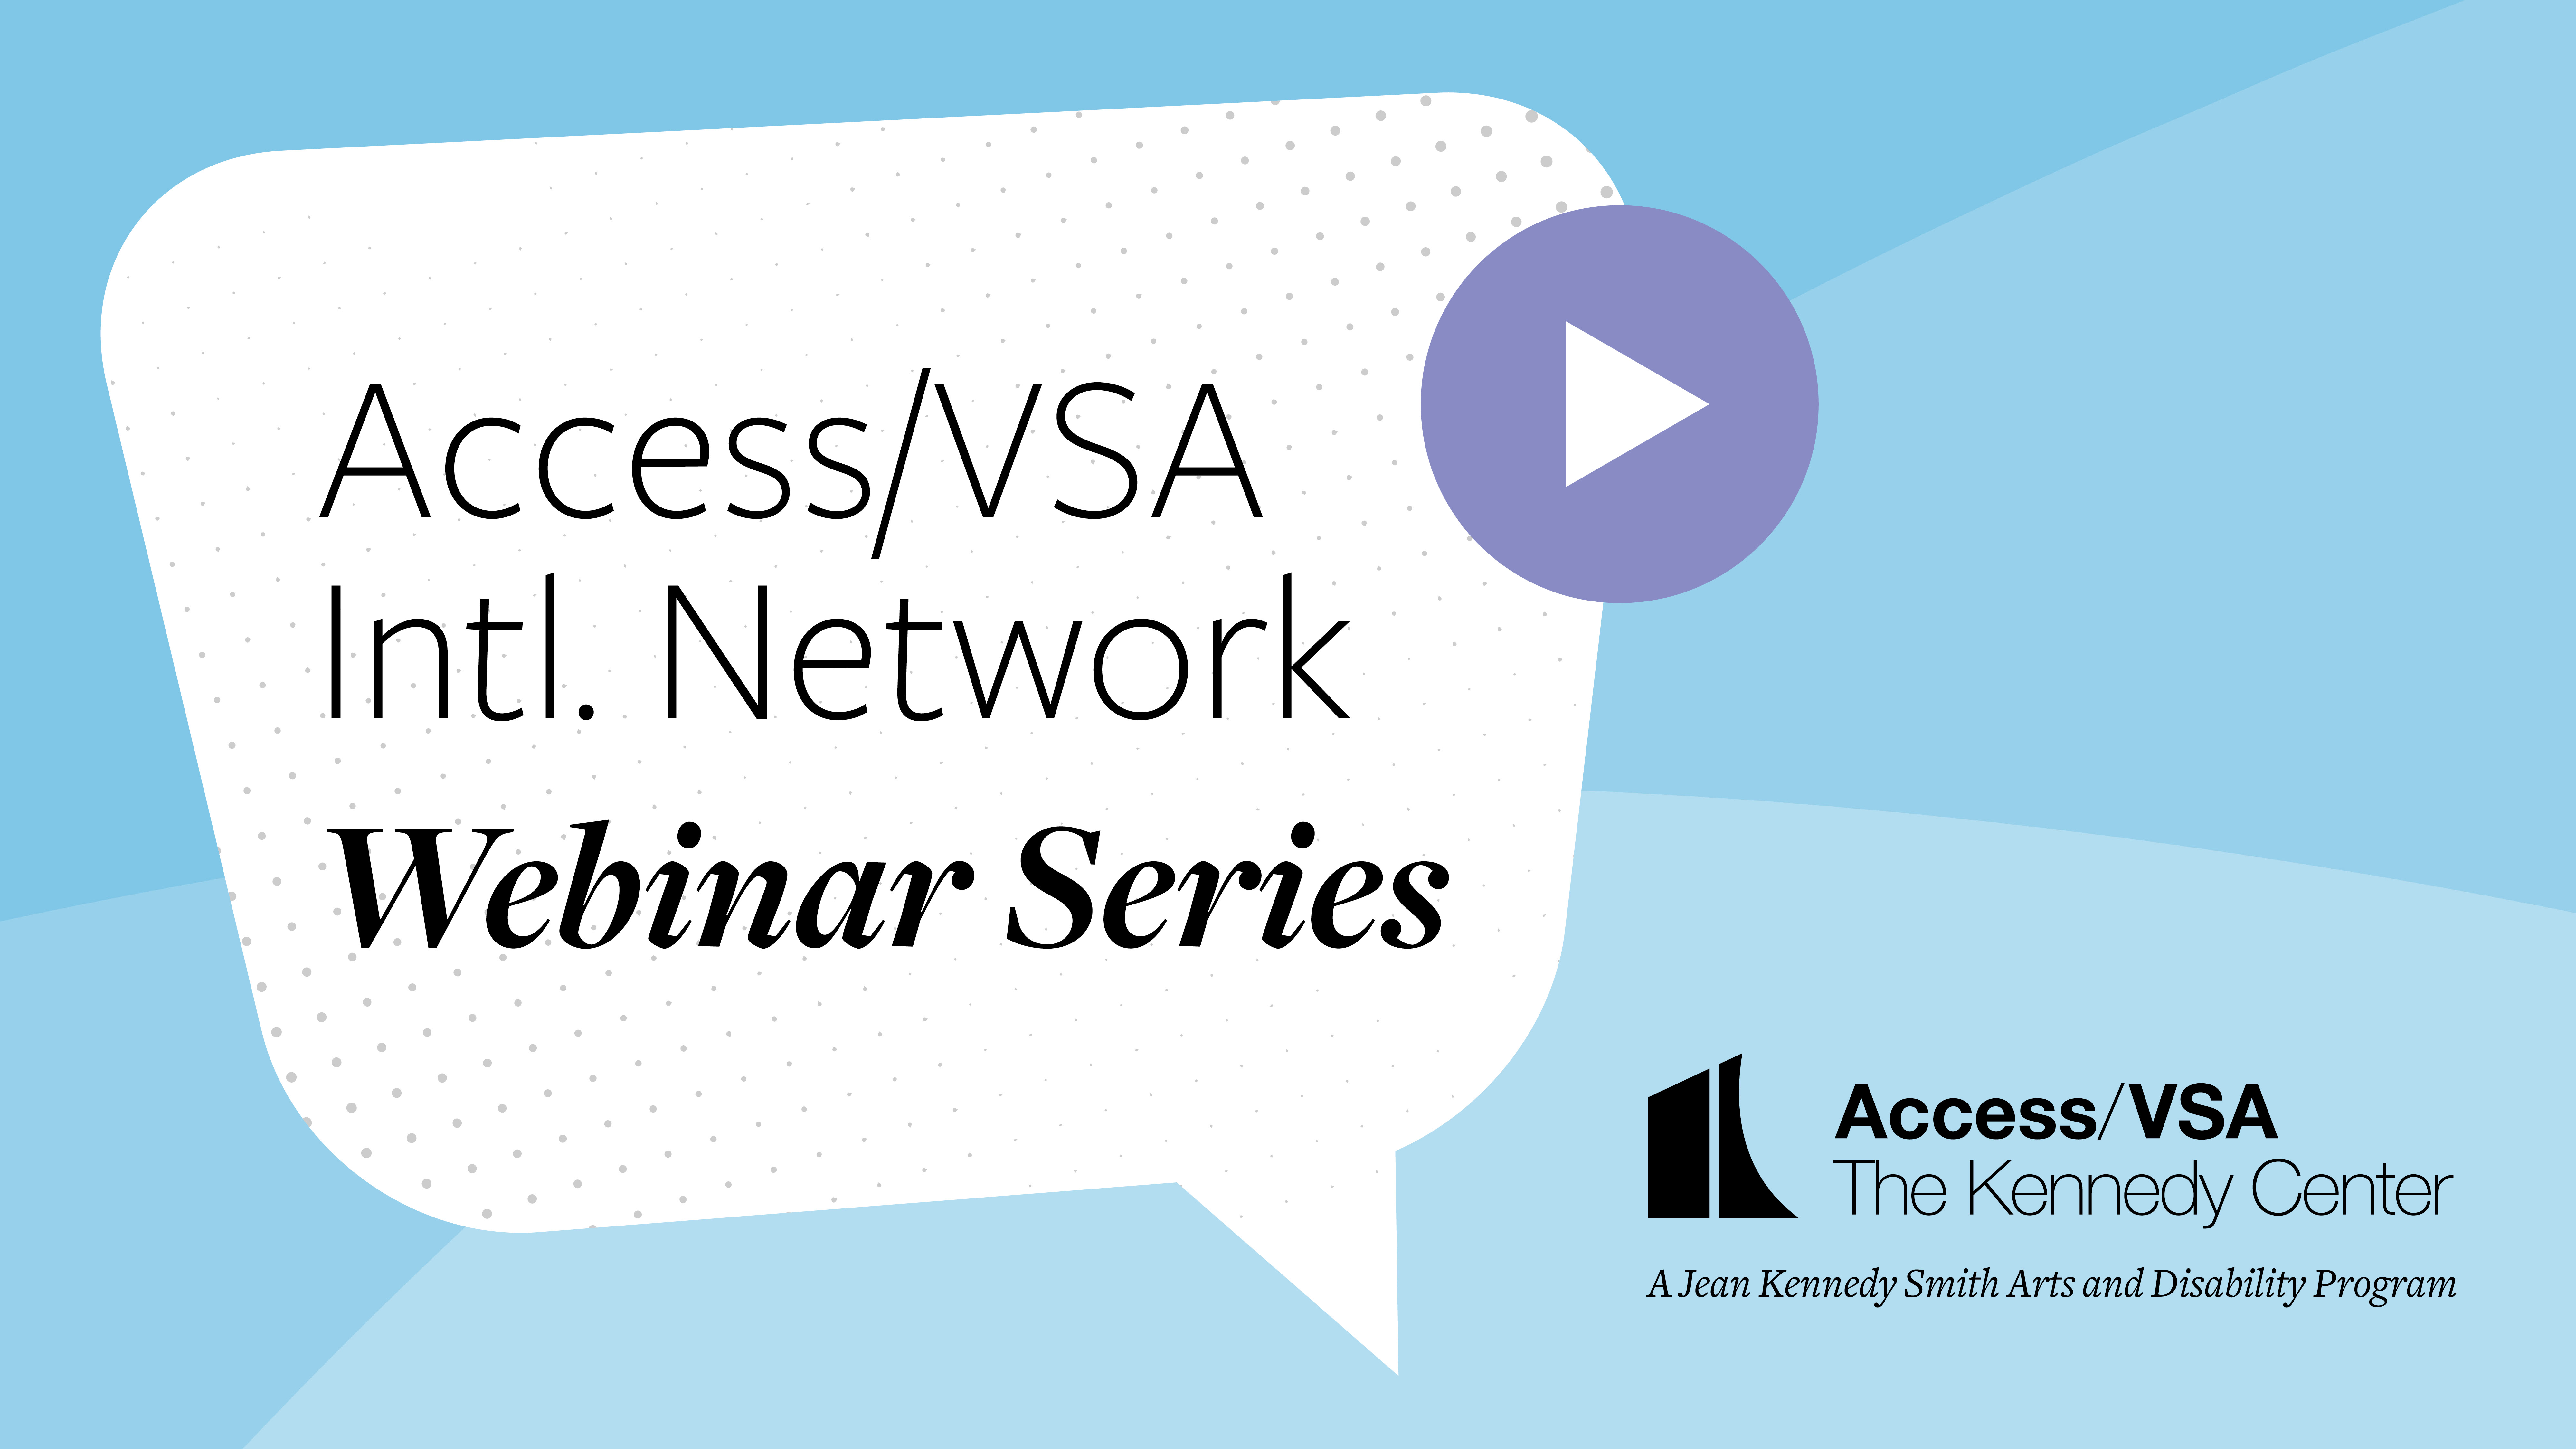 Graphic with a blue background and a white thought bubble with the text "Access/VSA Intl. Network Webinar Series". The Kennedy Center logo is in the lower right corner.